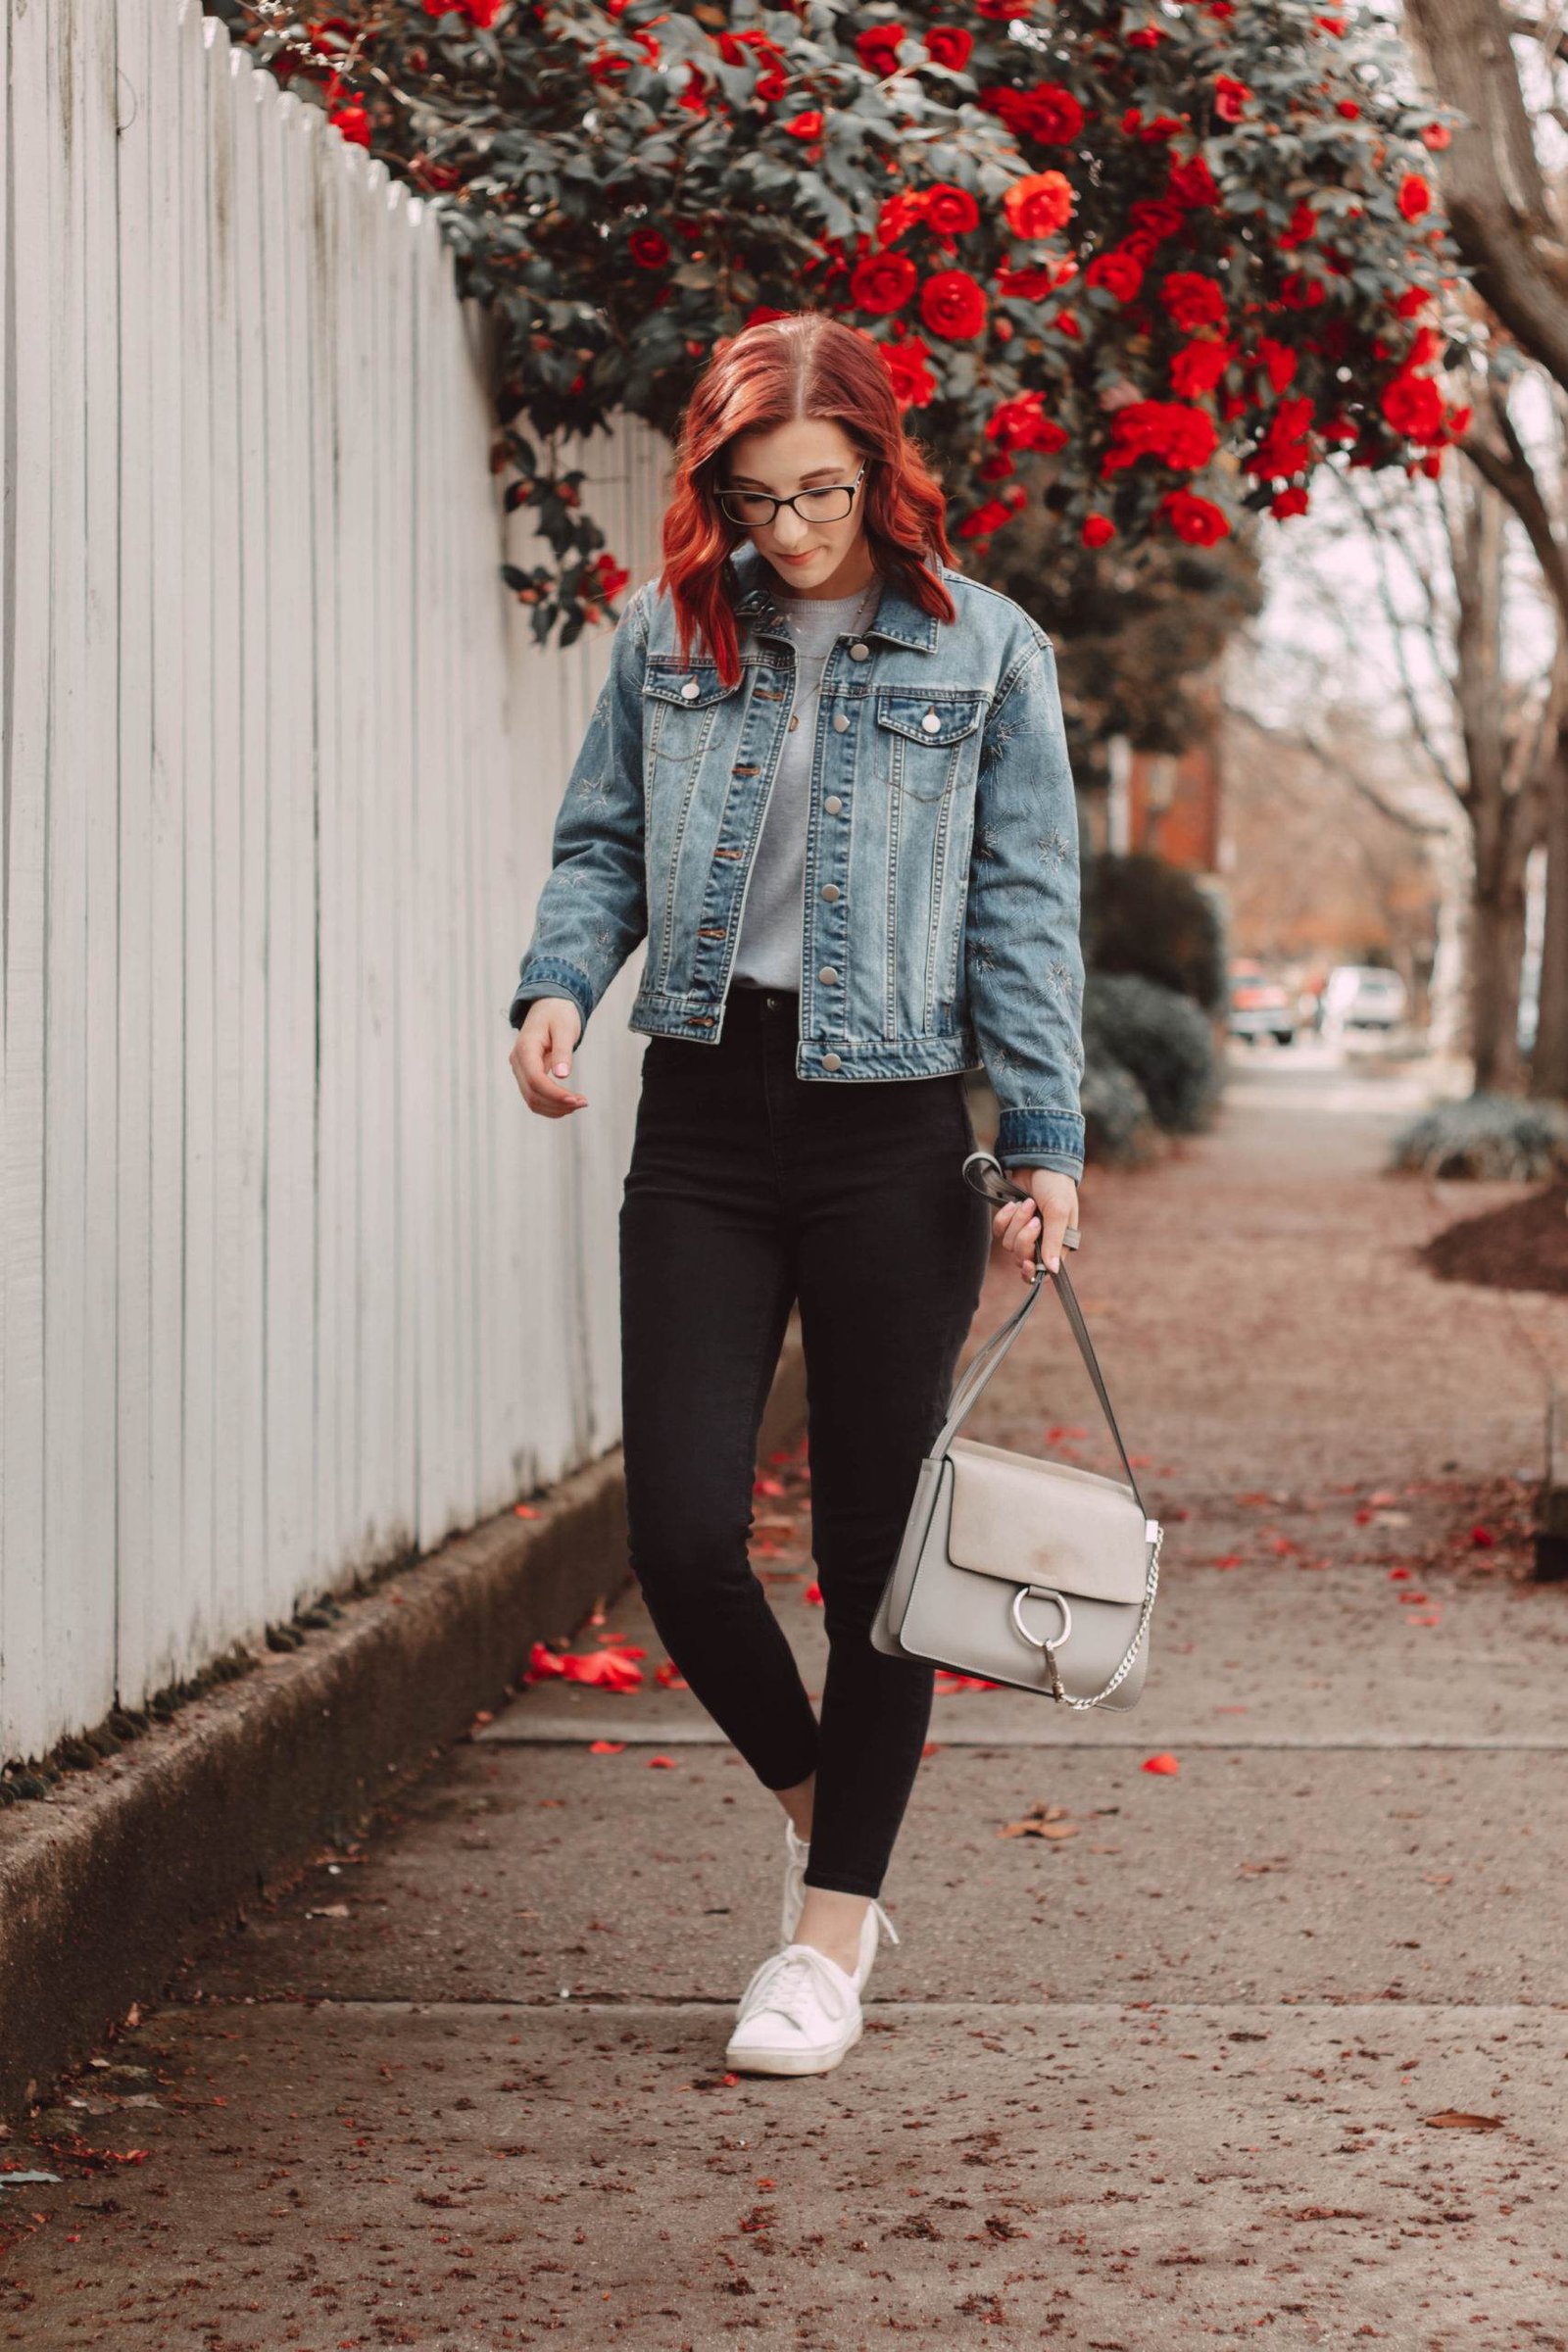 How to Style a Denim Jacket for Women | FEMME Connection